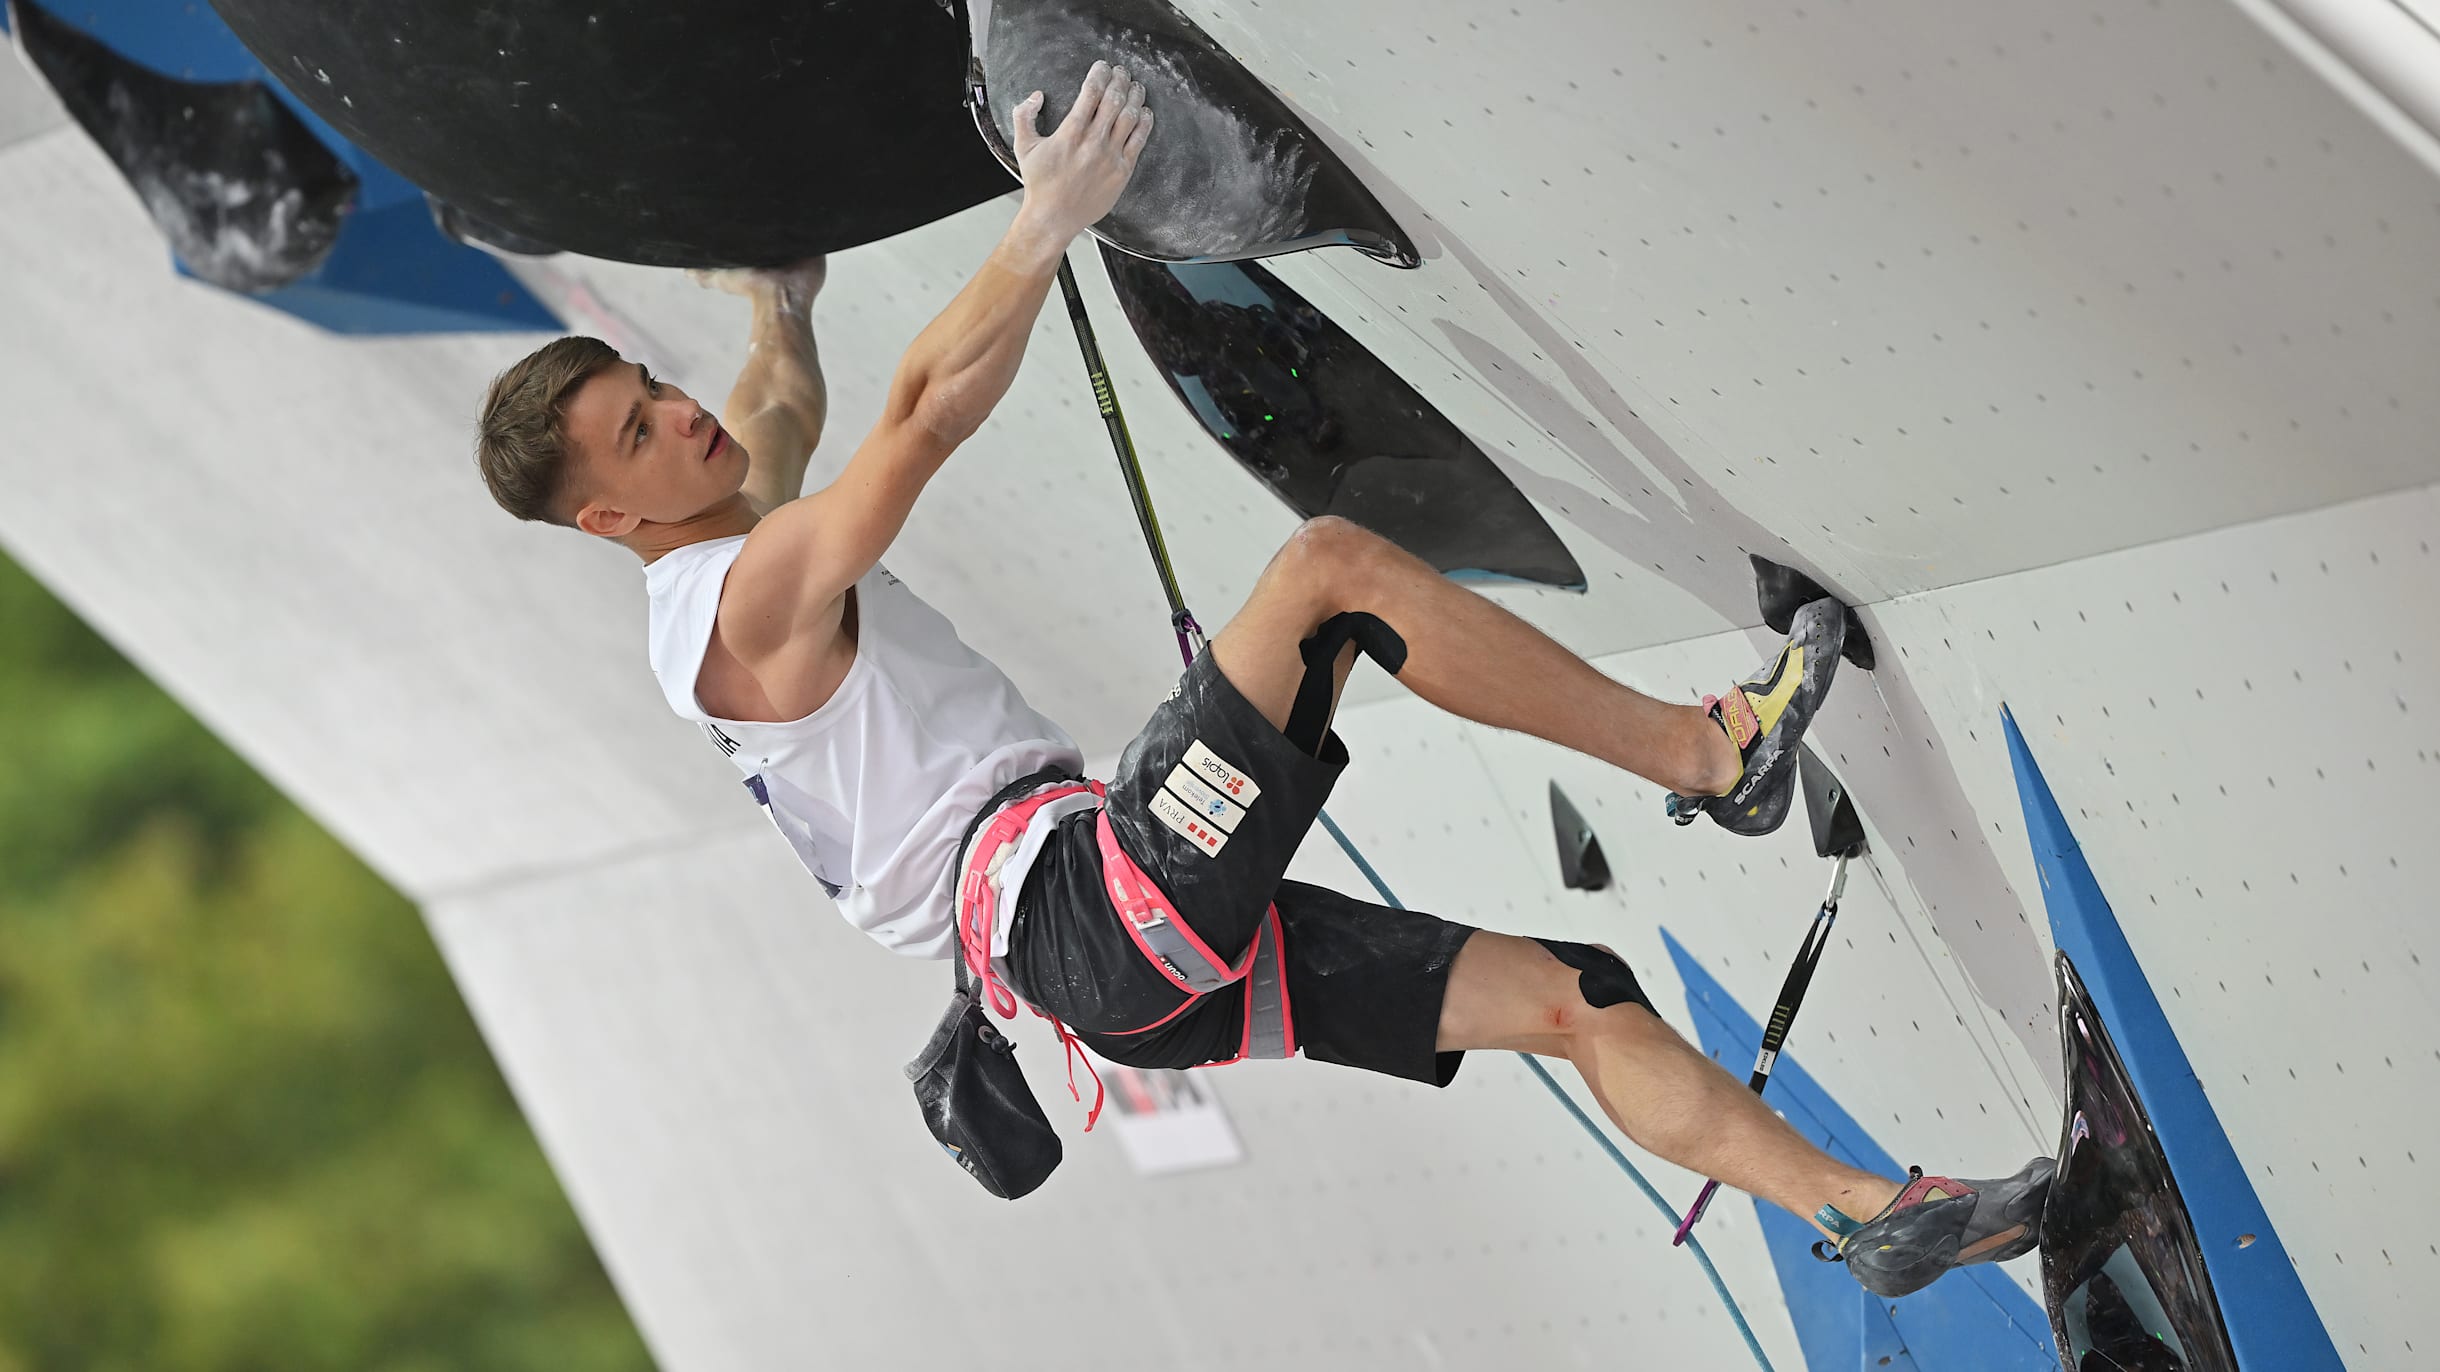 Four qualify for U.S. Olympic team in sport climbing at Pan